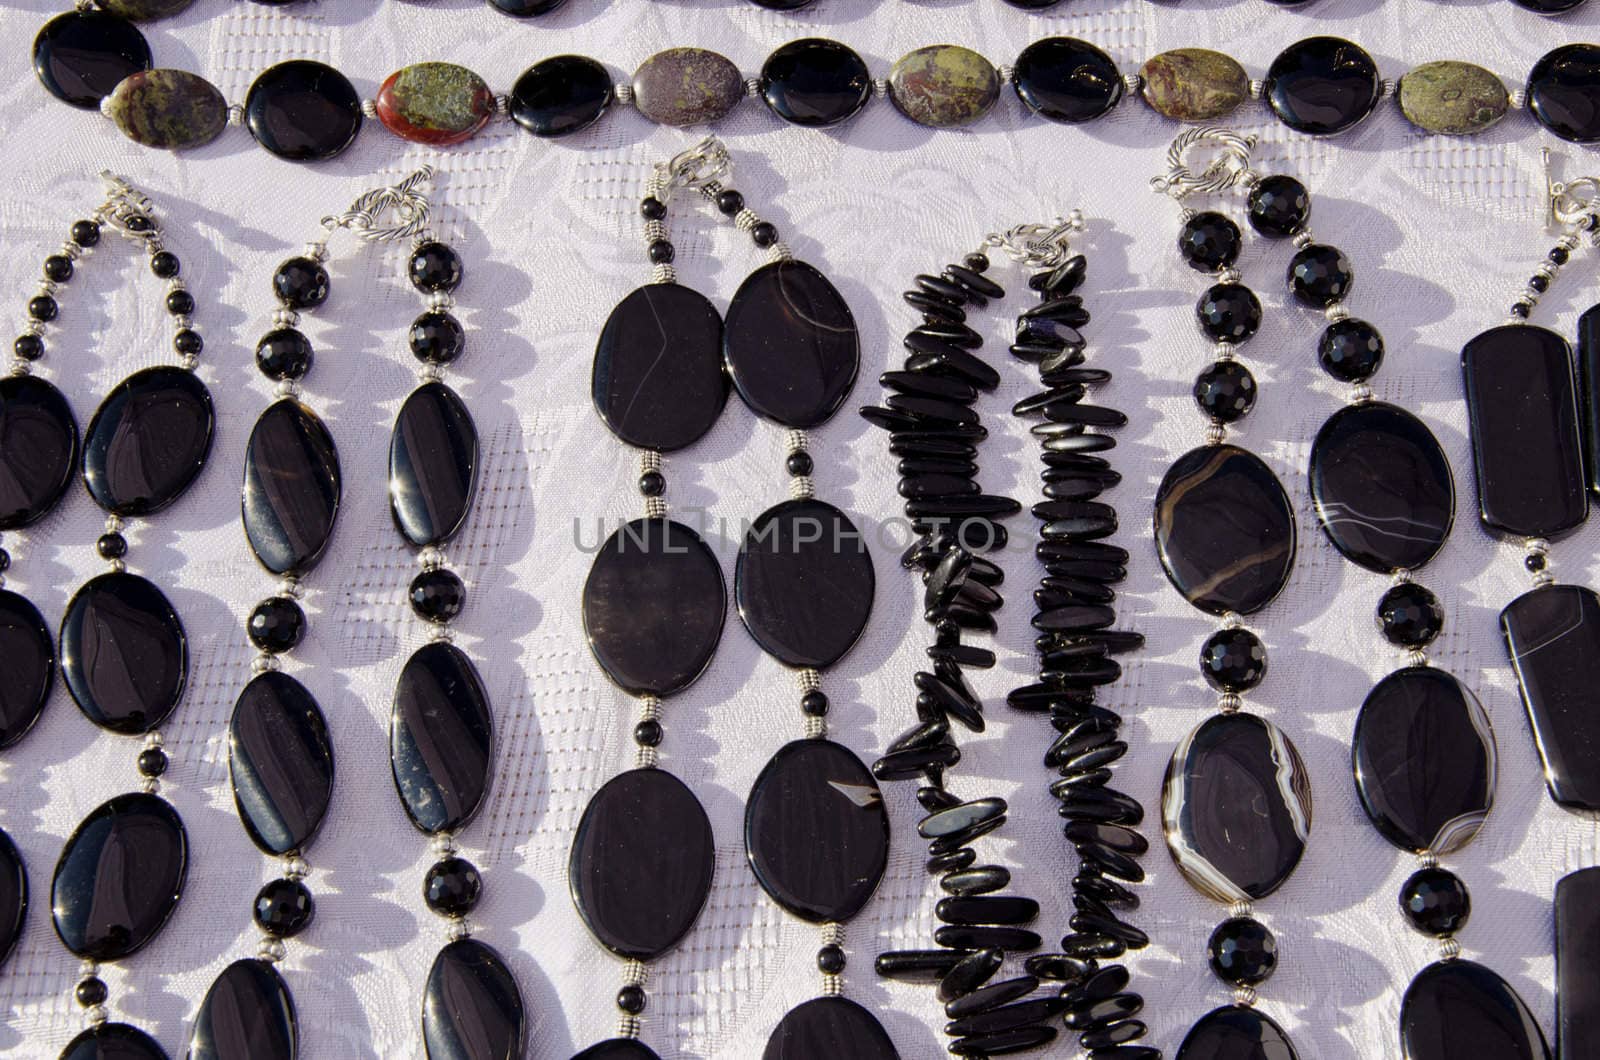 Dark black jewelry necklace closeup on table selling in outdoor fair market.